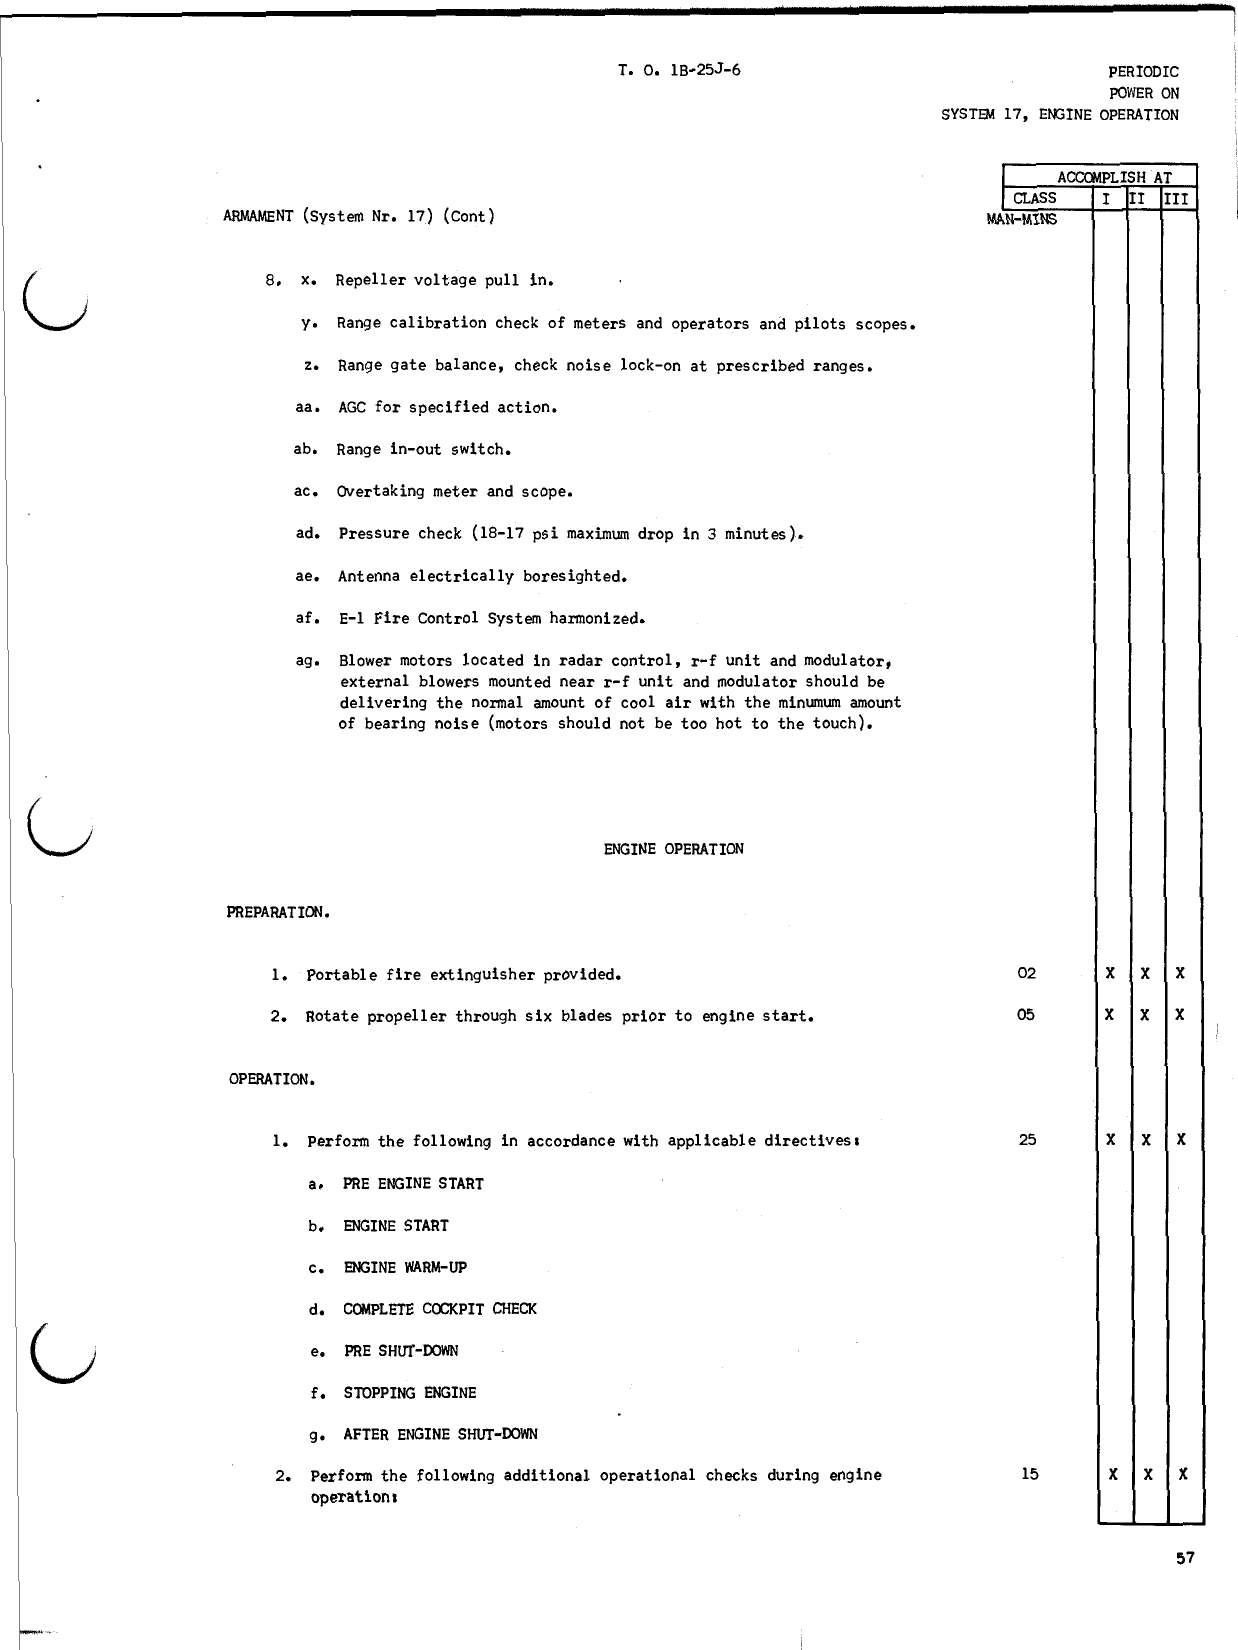 Sample page 61 from AirCorps Library document: Handbook Inspection Requirements - B-25